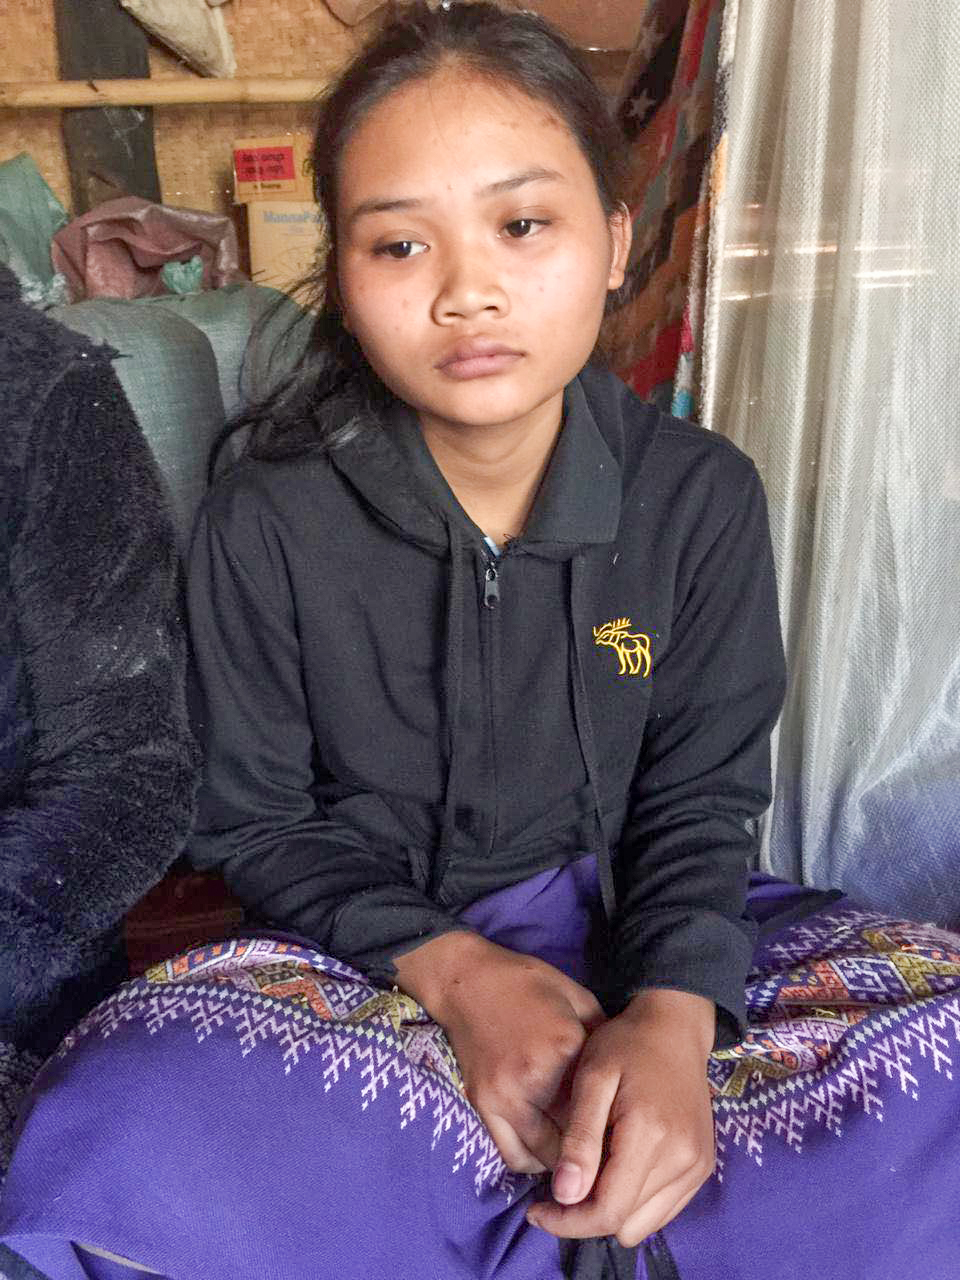 LAOS | JAN. 25, 2021 — Teenager Kicked Out of House for Following Christ